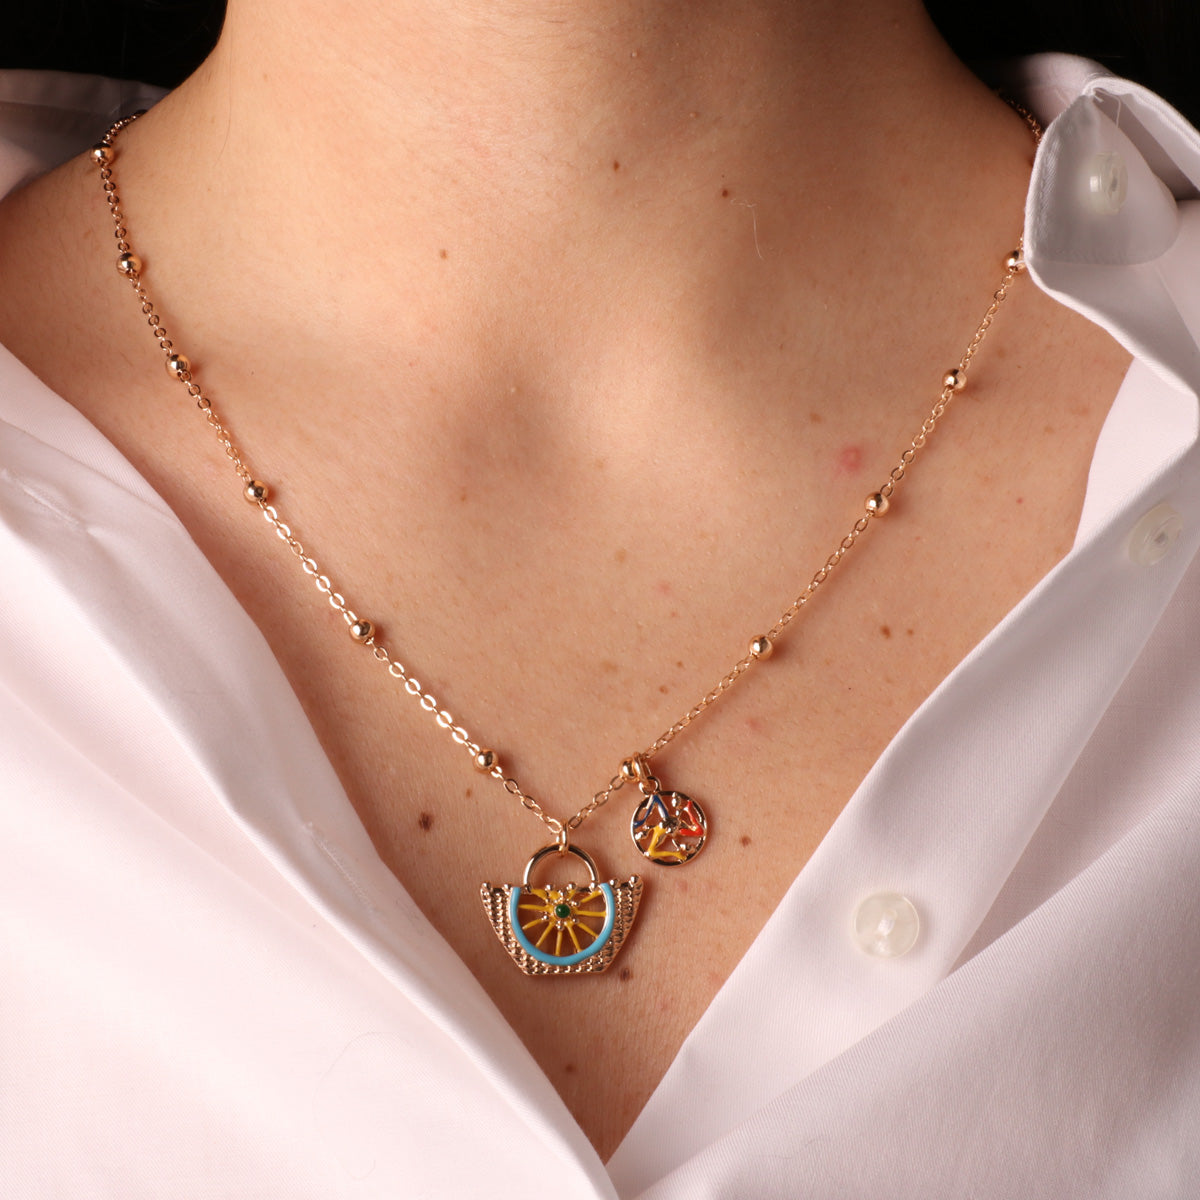 Metal necklace with Coffa and Trinacria symbol embellished with colored glazes